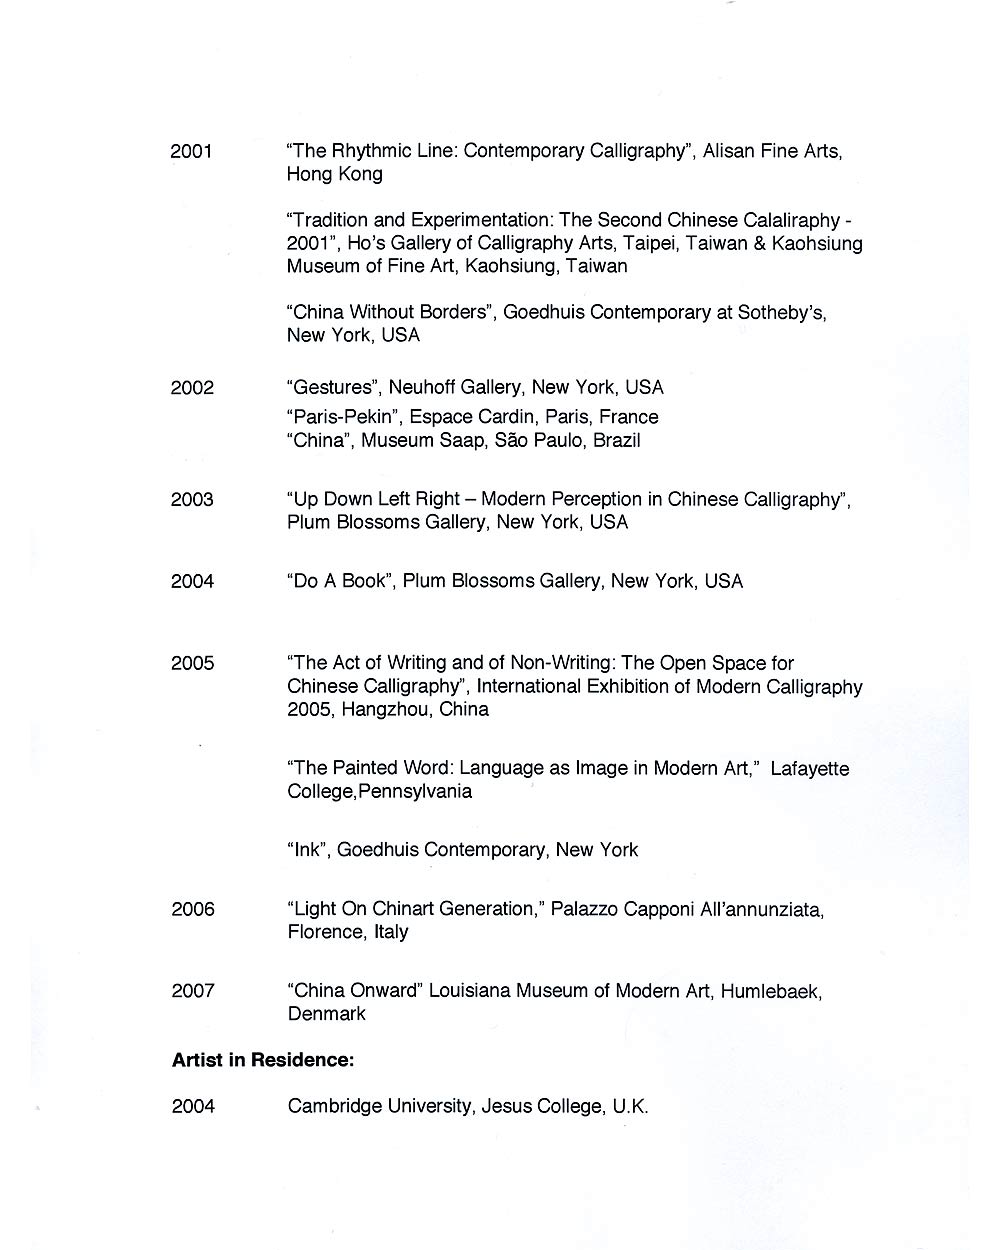 Ming Chip Fung's Resume, pg 4